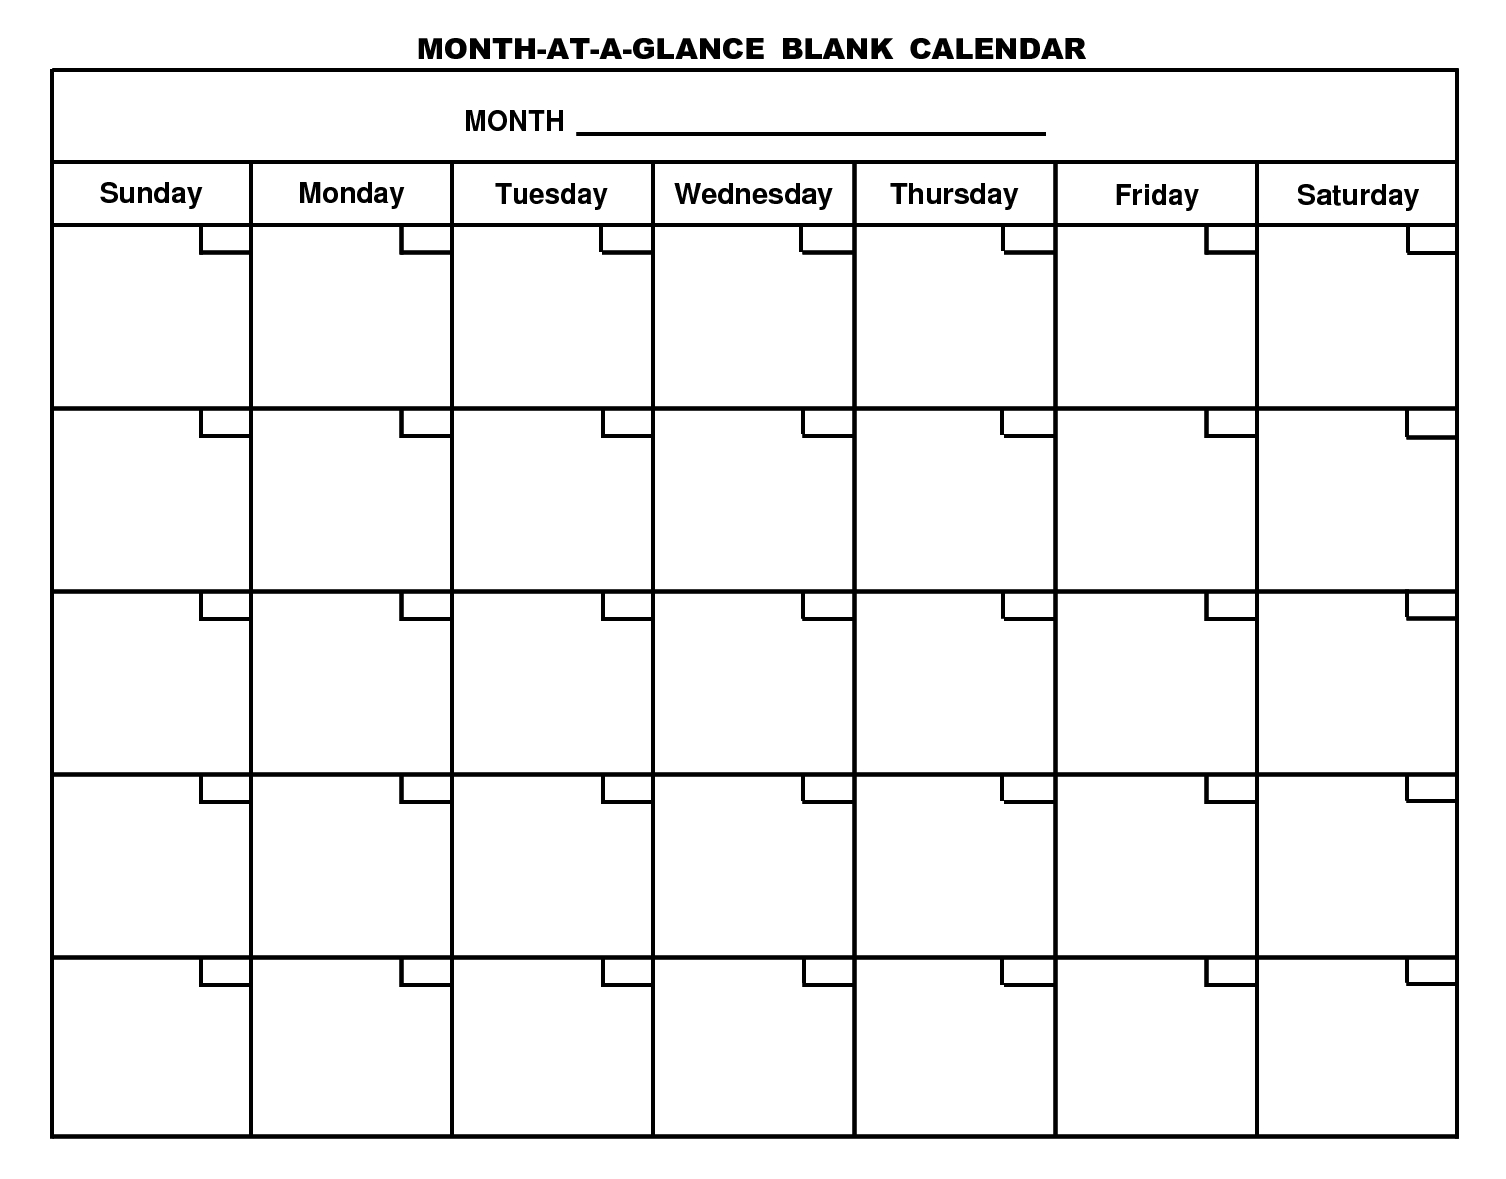 Free Monthly At A Glance Calendar | Online Telugu Calendar Exceptional Free Month At Glance Calendar